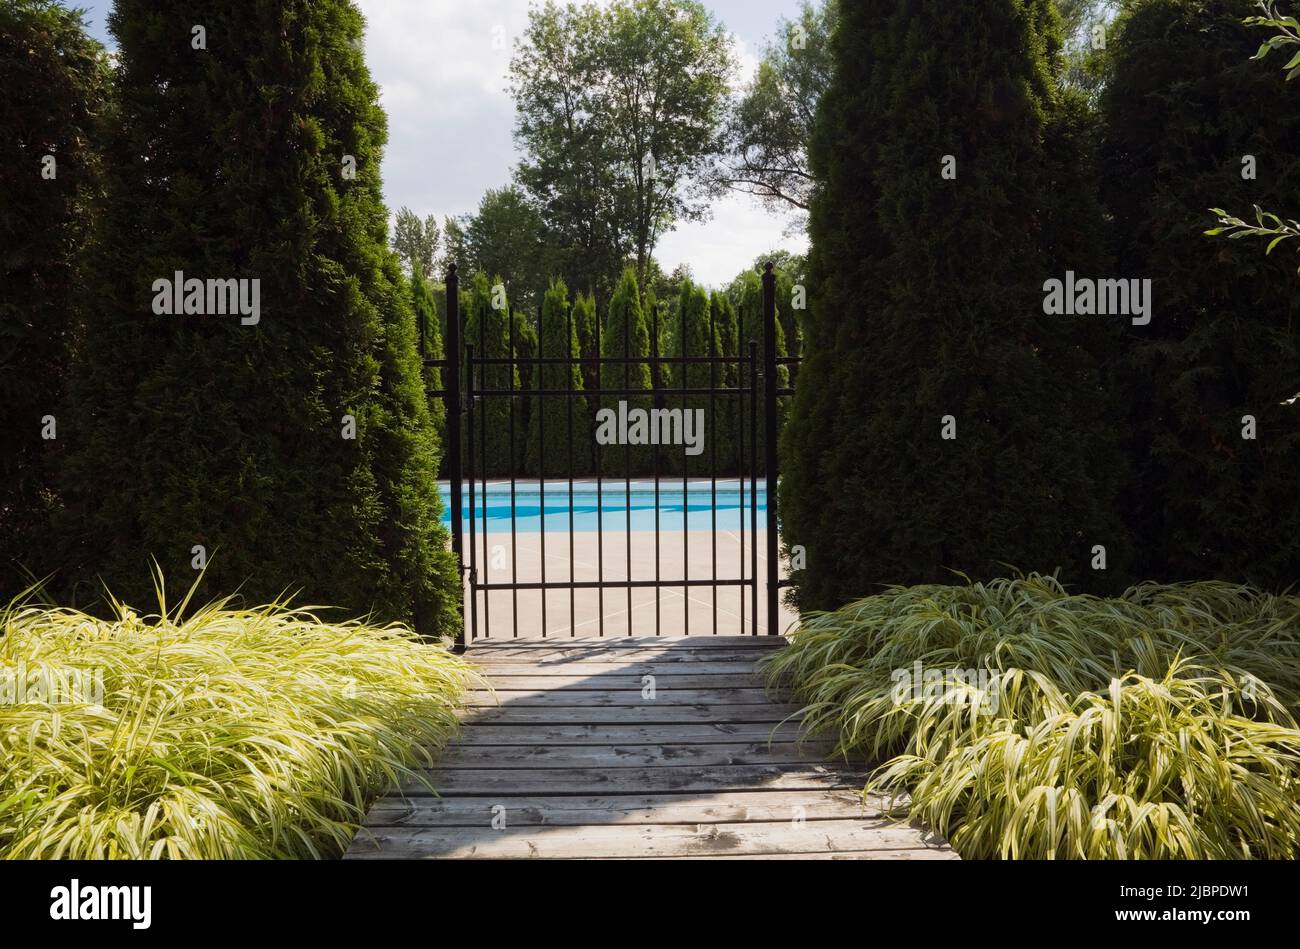 Wooden walkway leading to inground swimming pool surrounded by cedar tree hedge in backyard in summer. Stock Photo